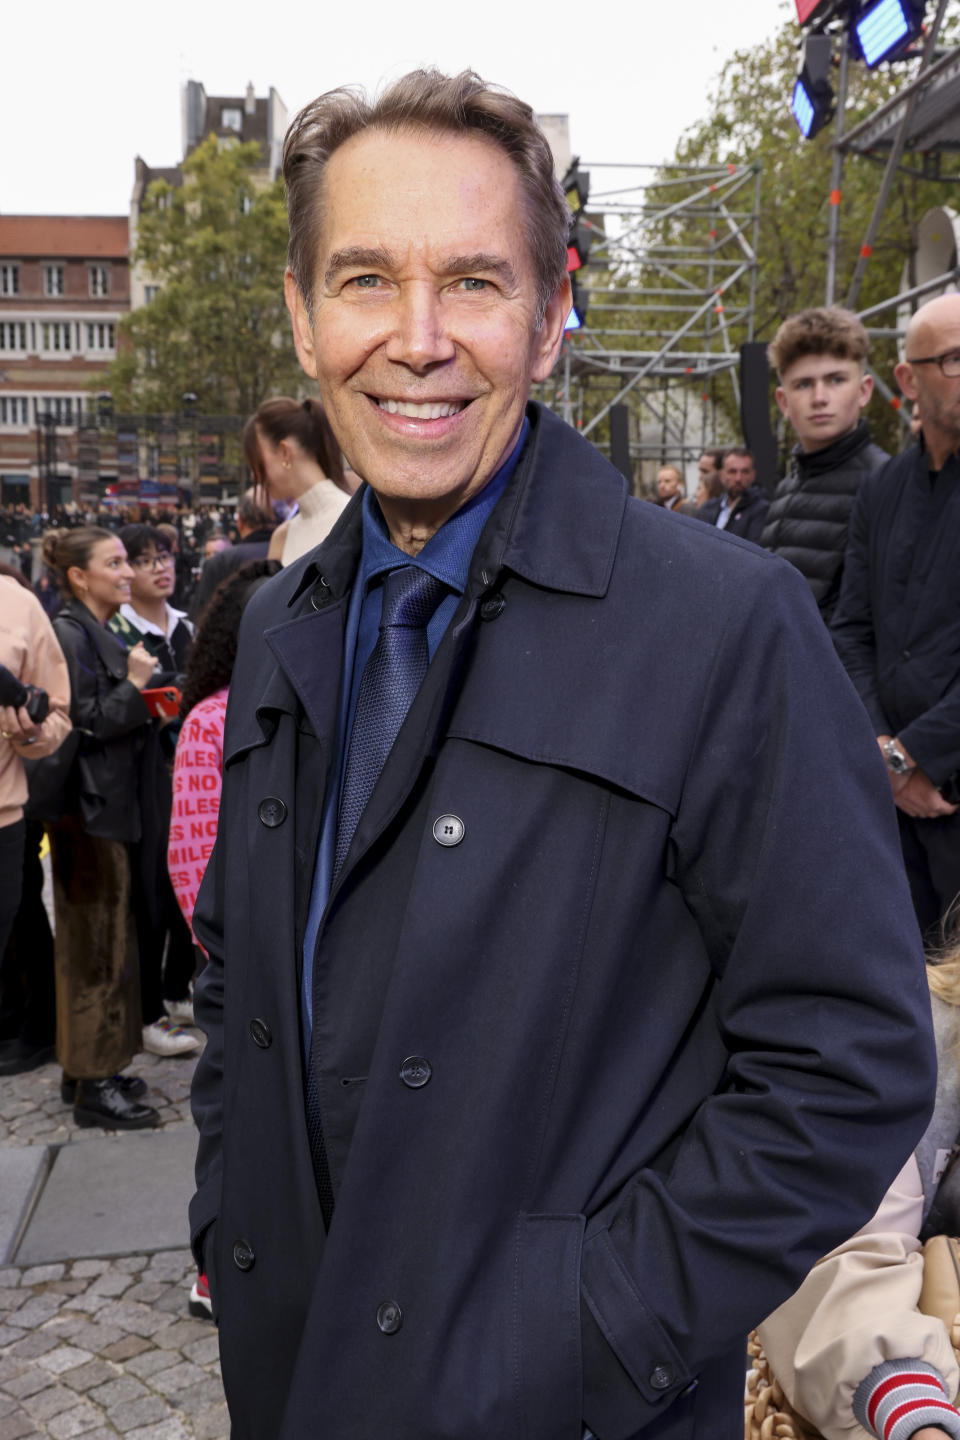 Jeff Koons attends the Stella McCartney ready-to-wear Spring/Summer 2023 fashion collection presented Monday, Oct. 3, 2022 in Paris. (Photo by Vianney Le Caer/Invision/AP)